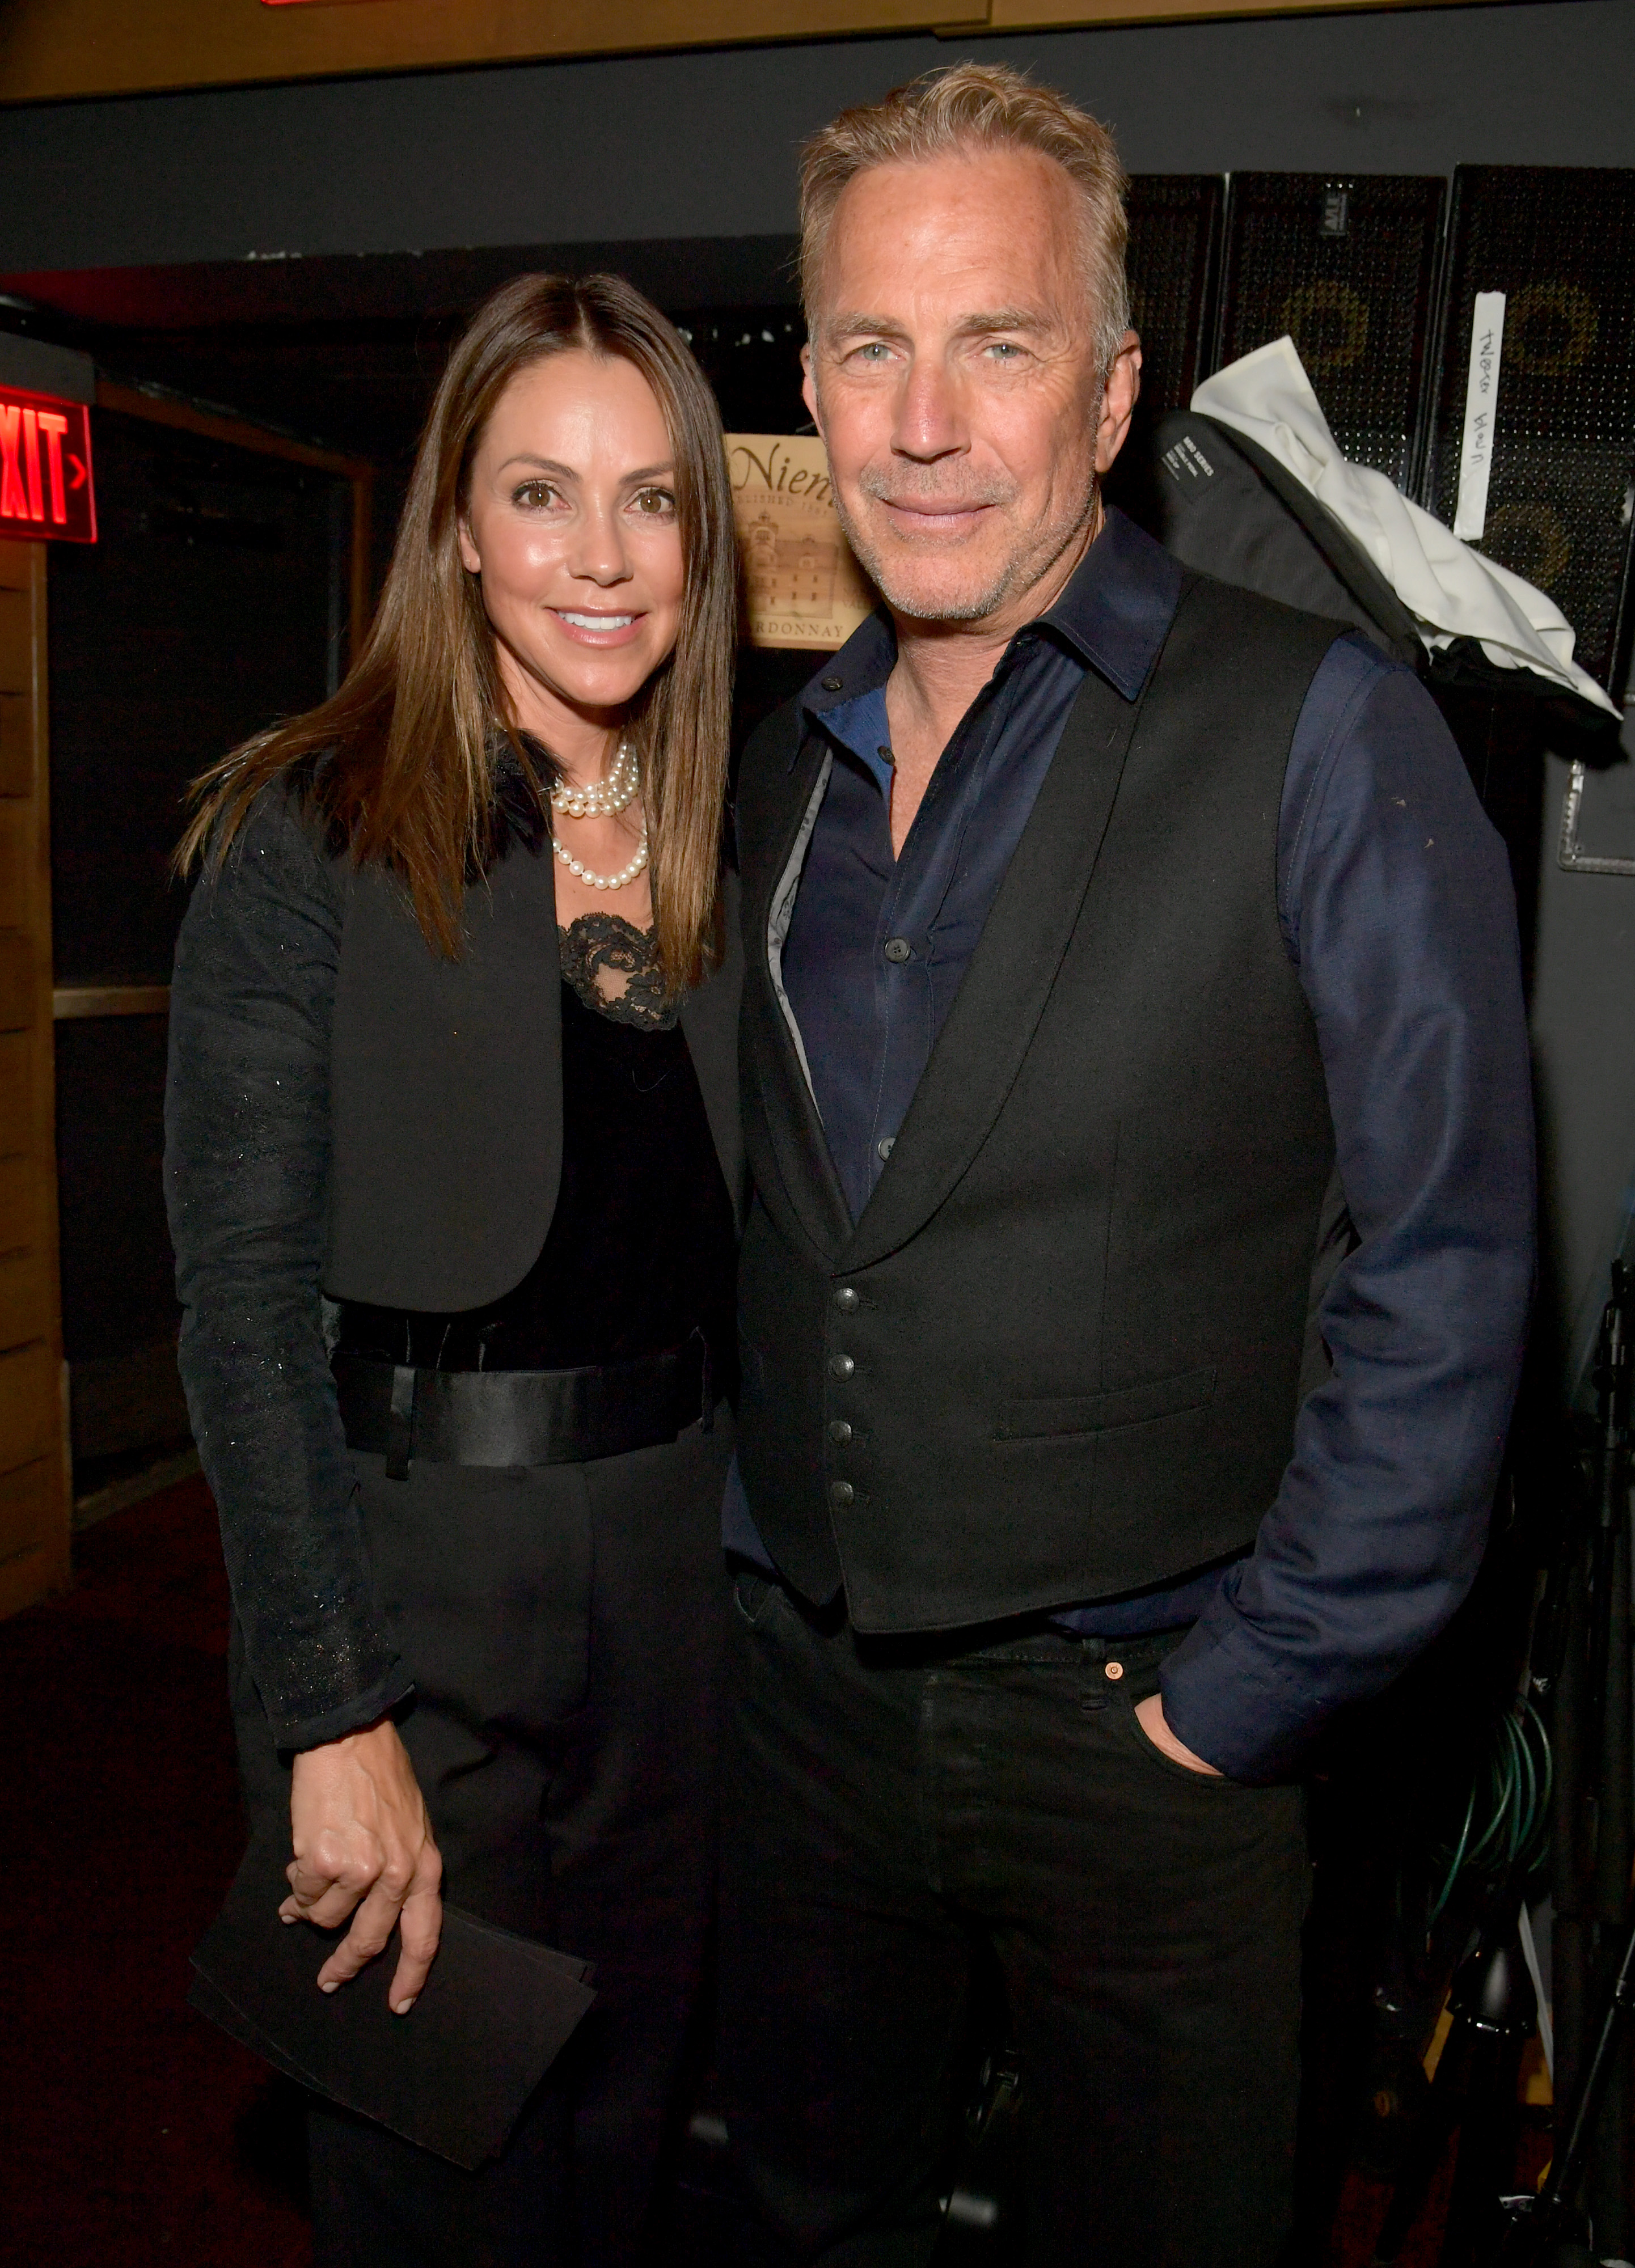 Christine Baumgartner and Kevin Costner at the OmniPeace Foundation Presents Rock Rwanda Benefit in Los Angeles, 2022 | Source: Getty Images